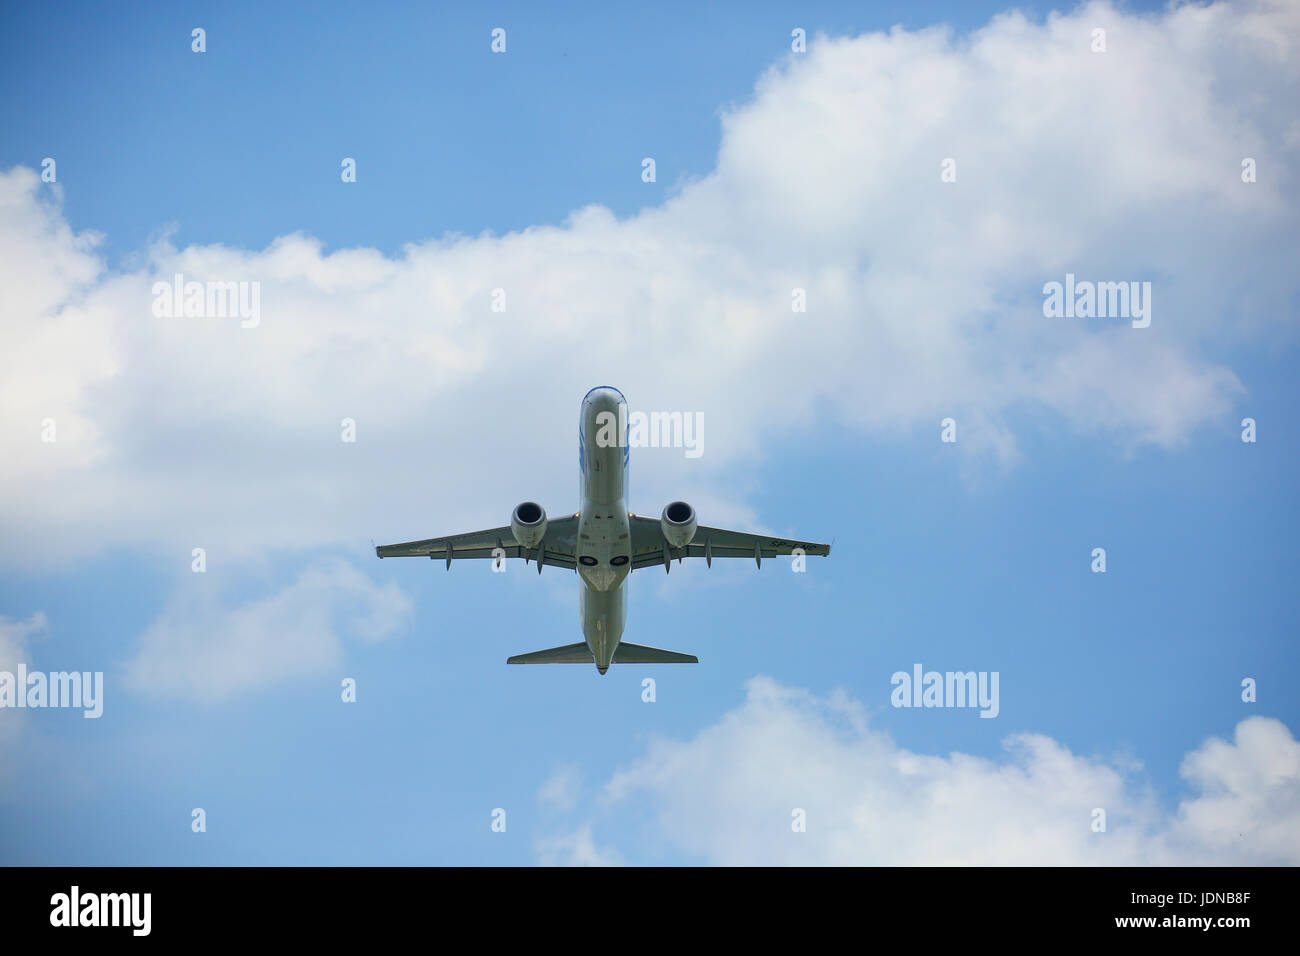 LOT airlines aircrafts takeoff Stock Photo